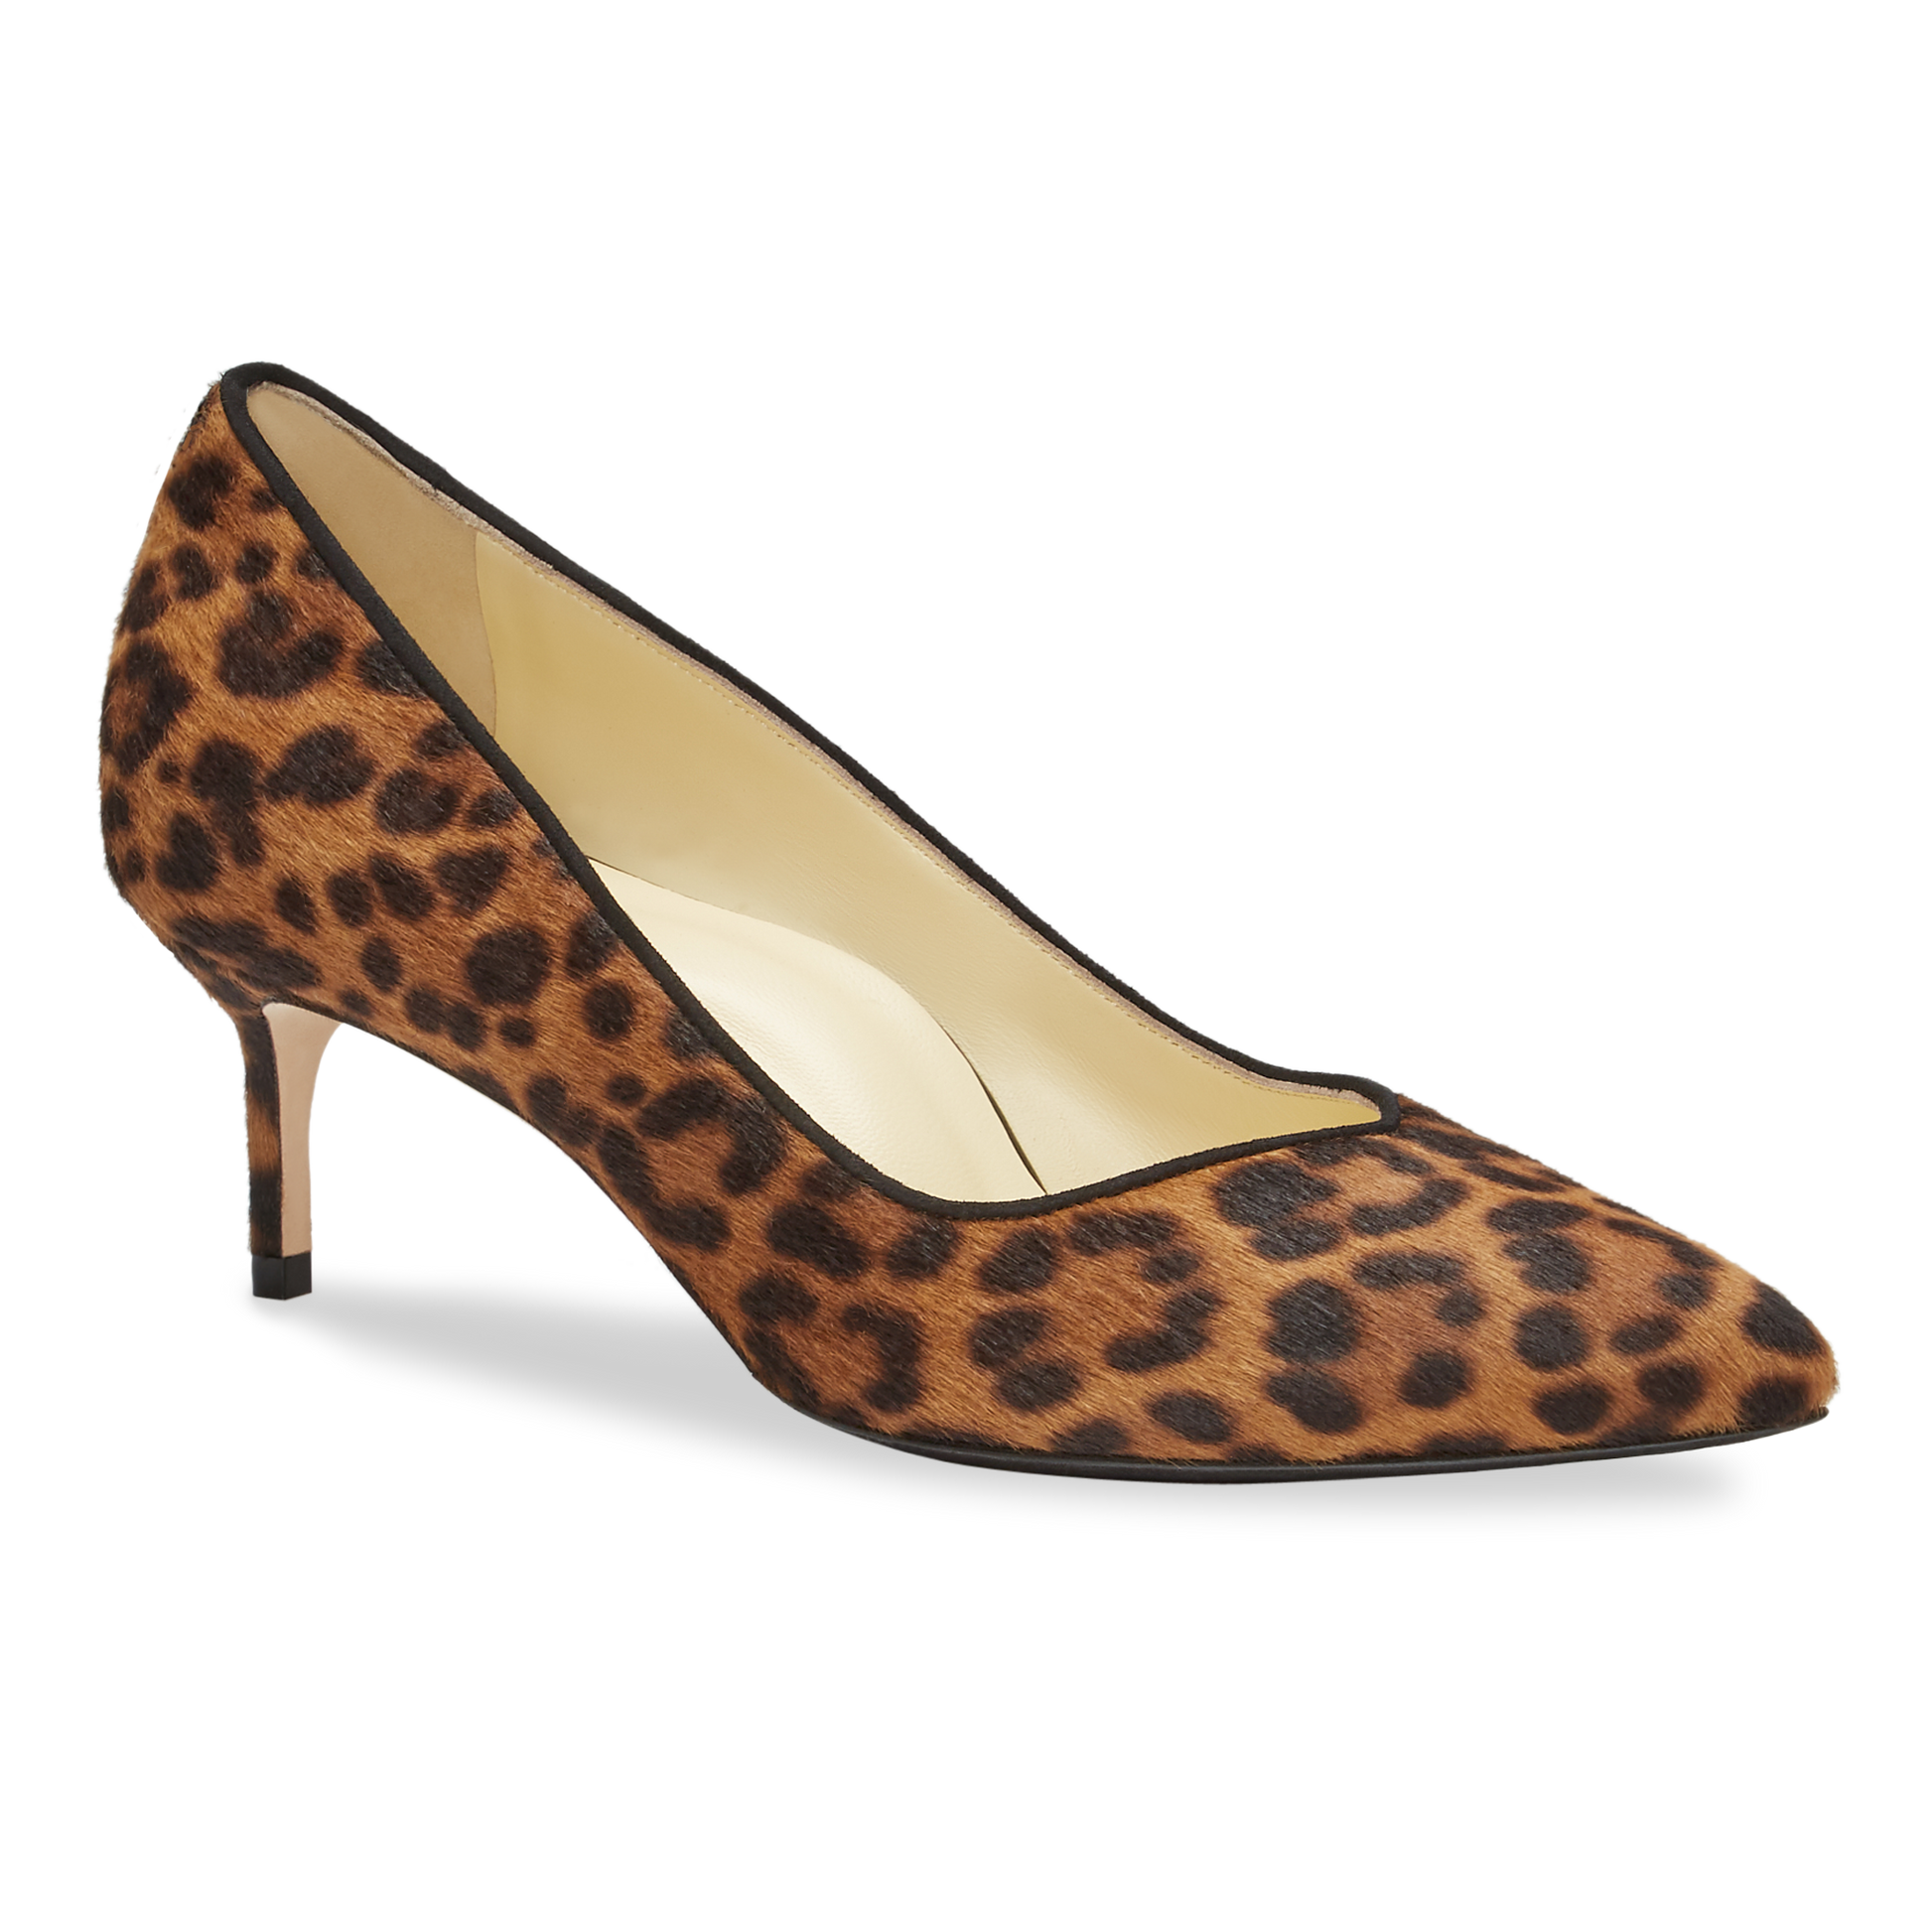 50mm Italian Made Perfect Pointed Toe Pump in Chocolate Leopard Hair Calf